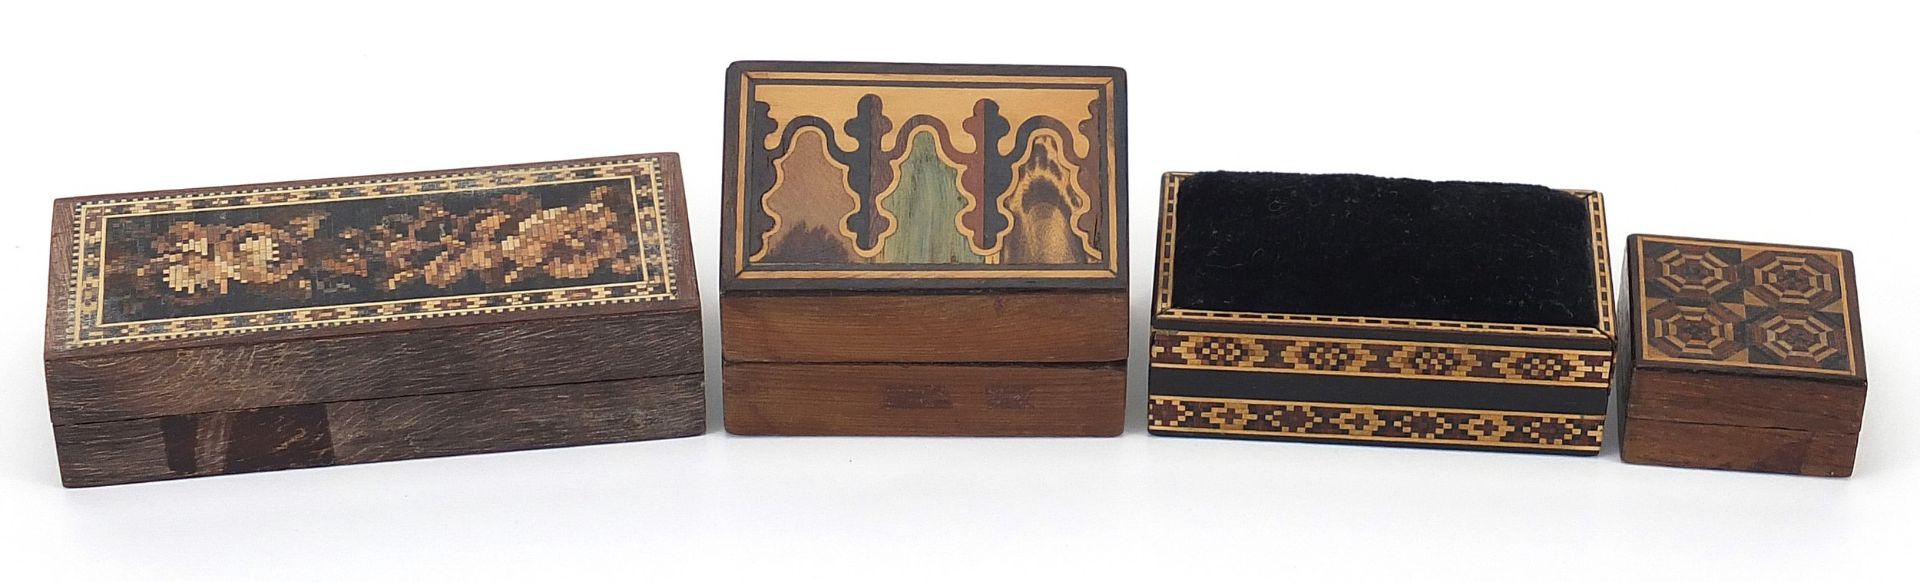 Victorian Tunbridge Ware with micro mosaic inlay comprising pin cushion and three boxes including